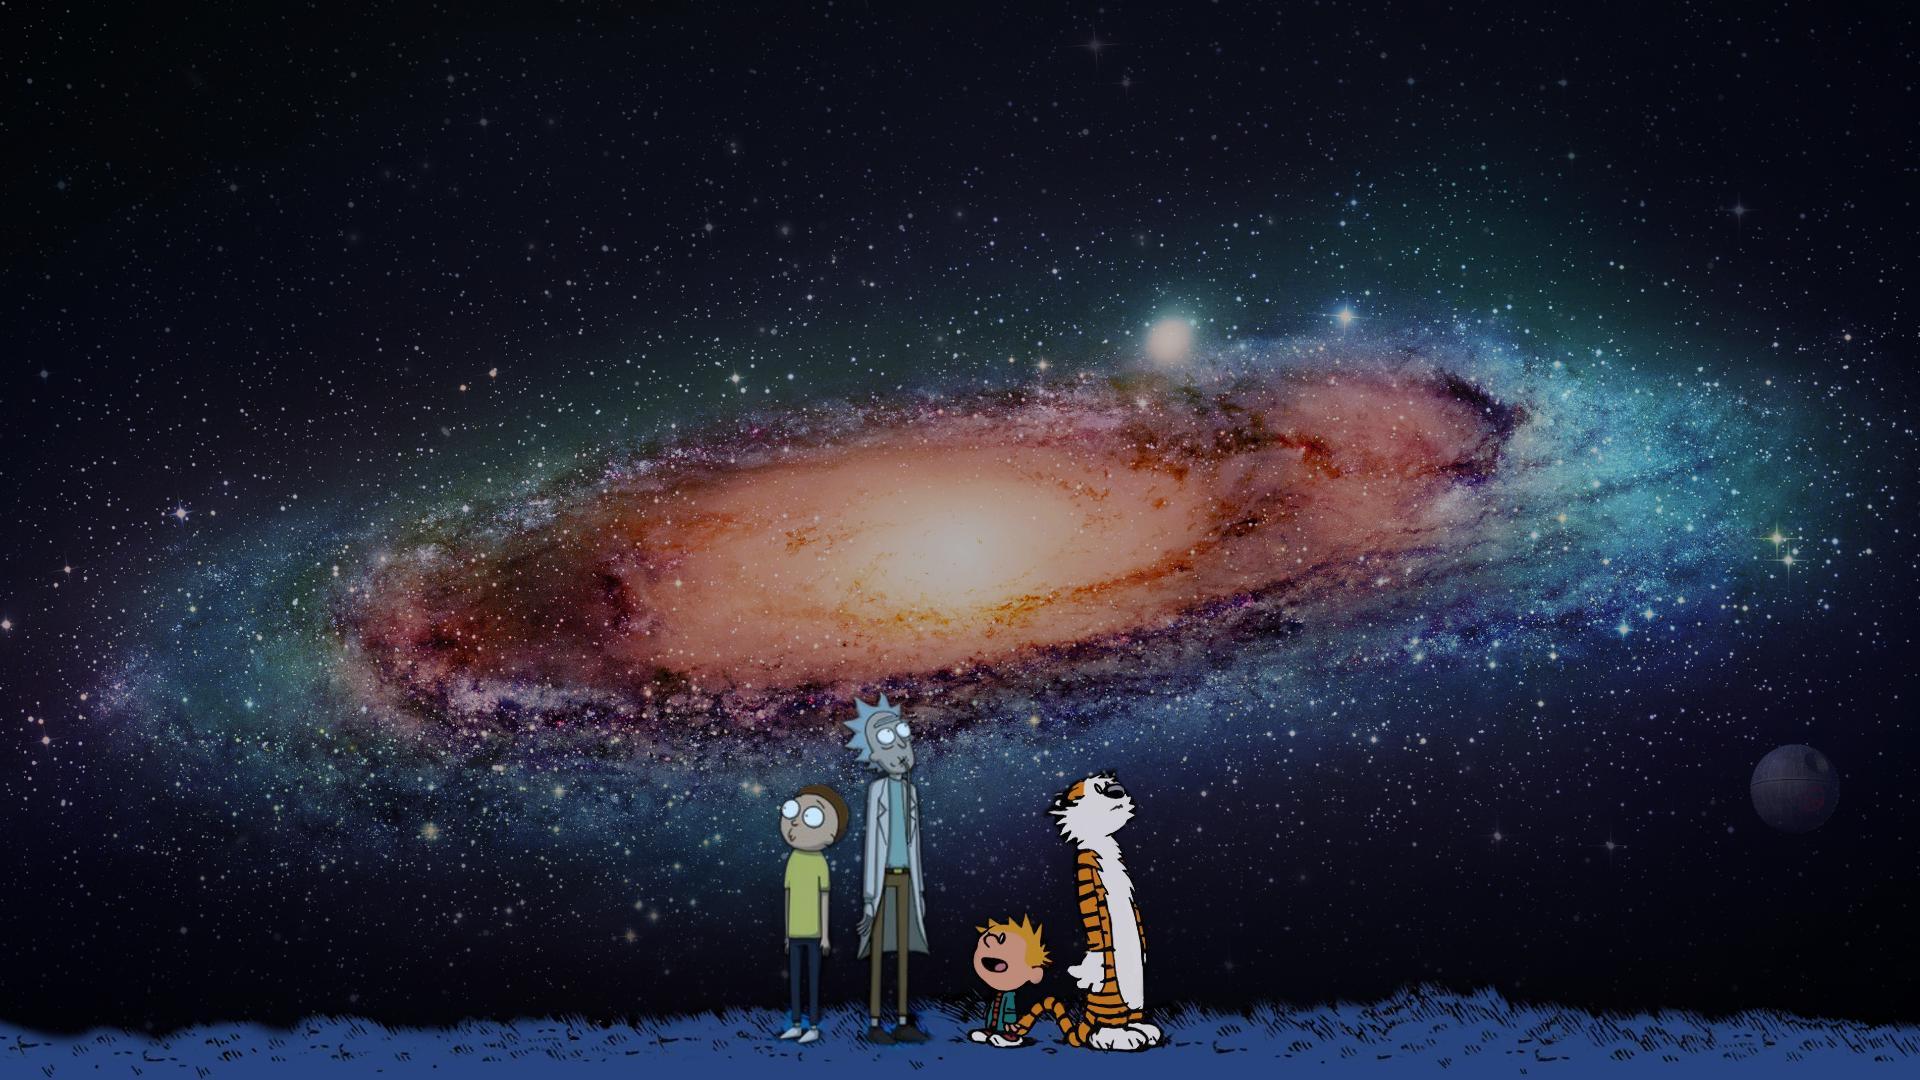 calvin and morty(1920x1080)